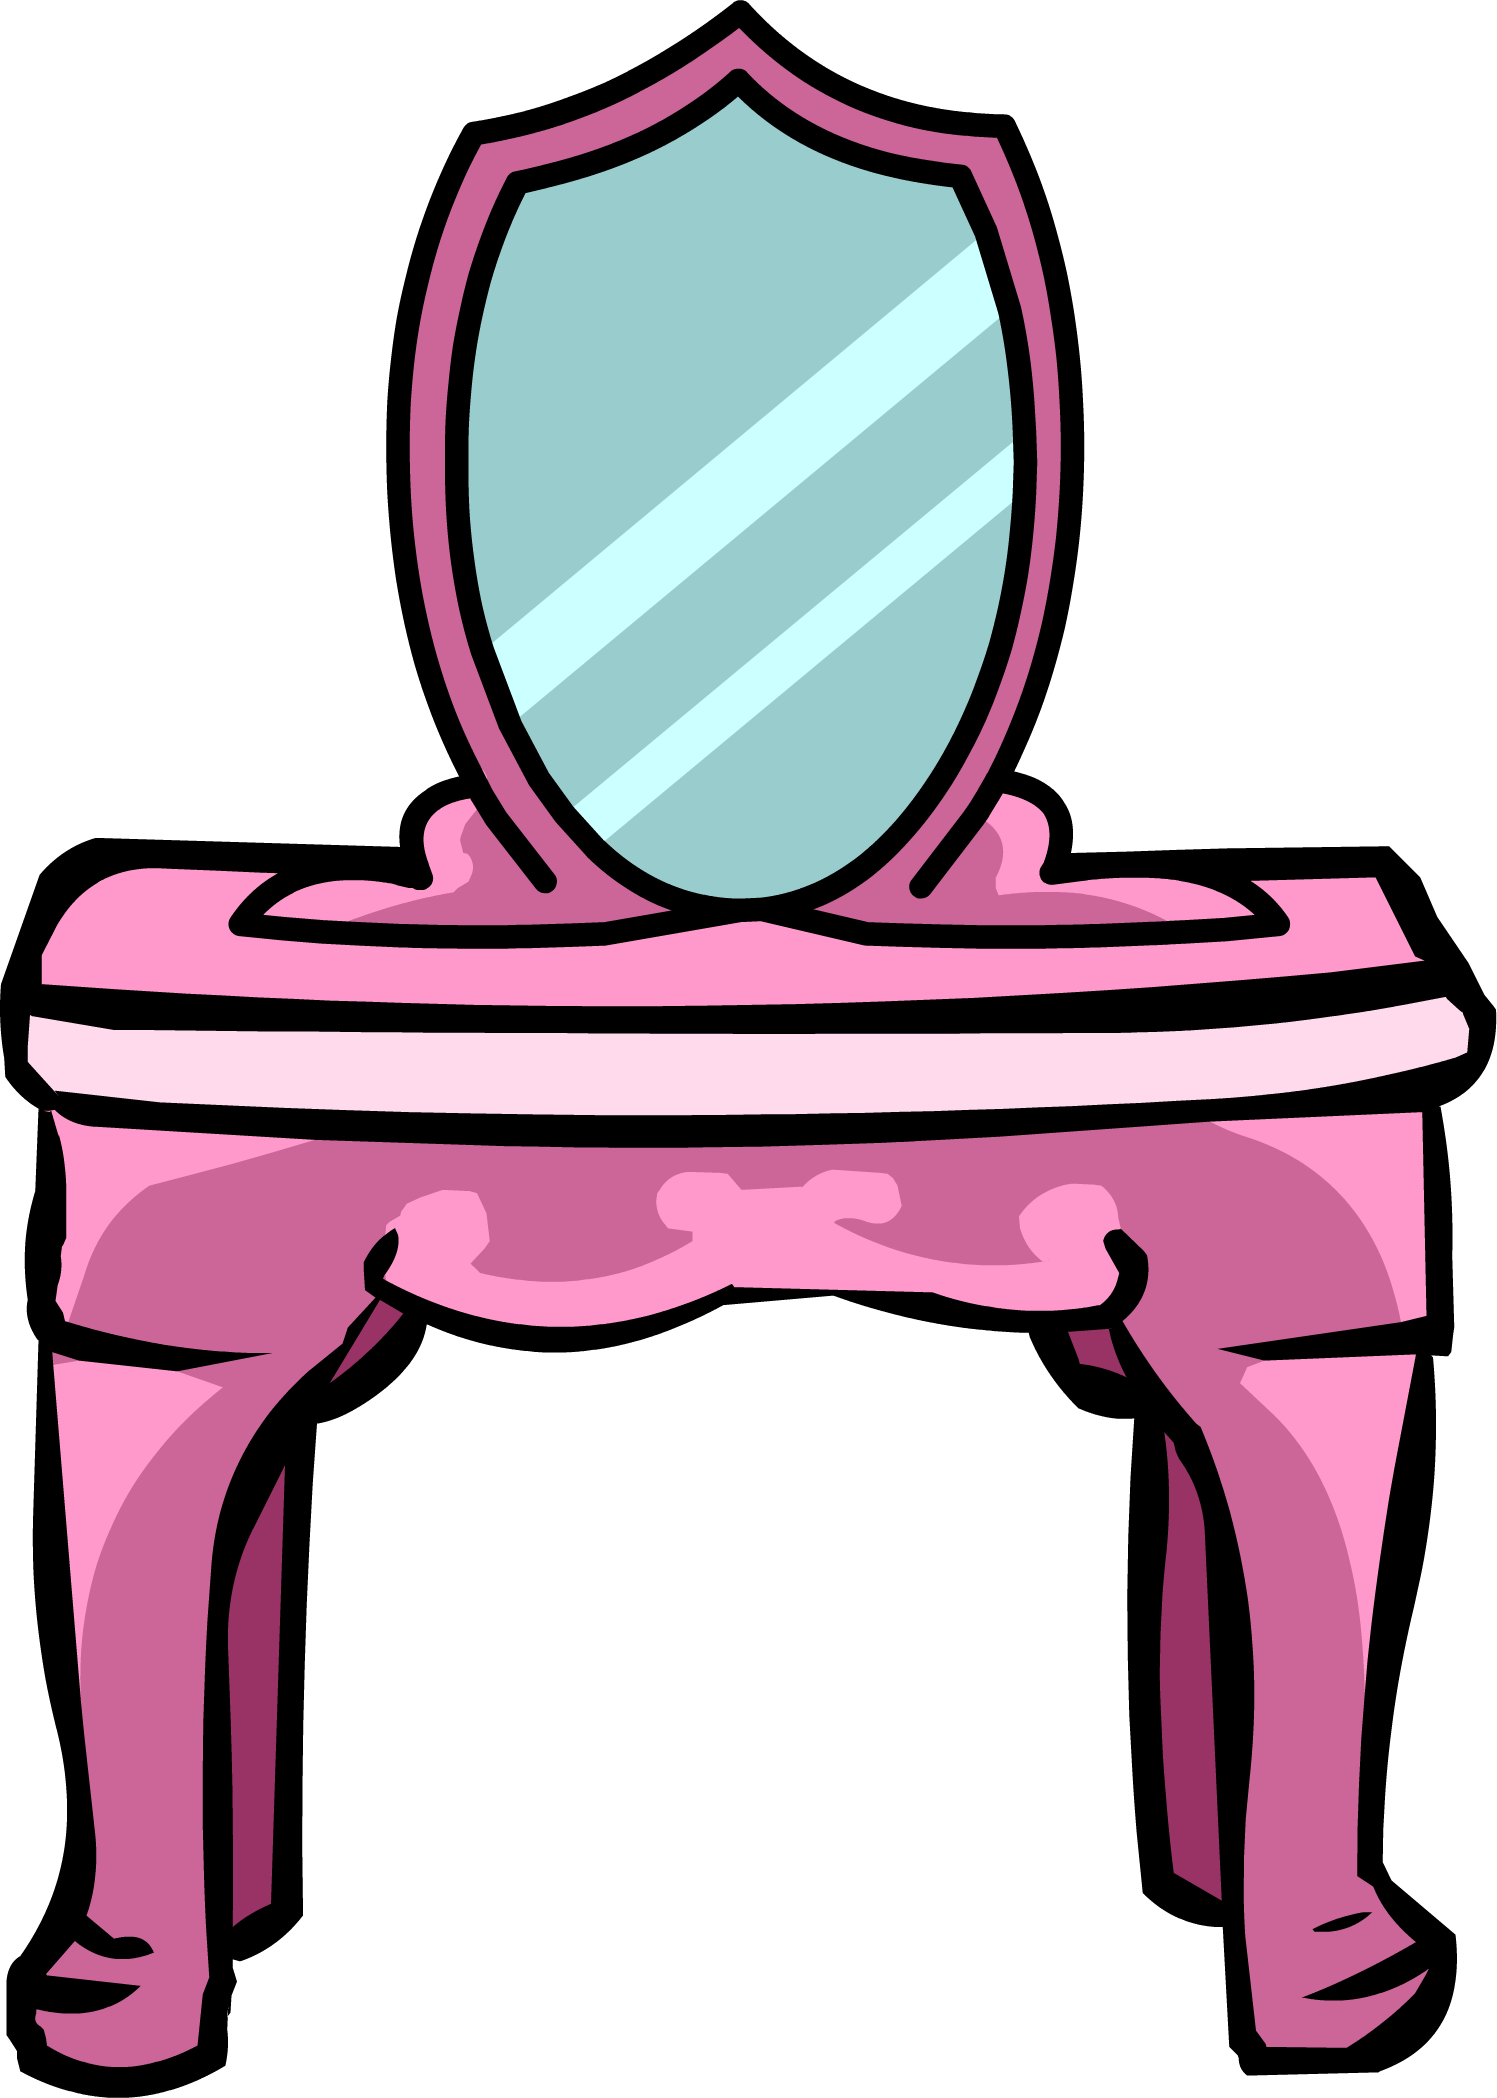 Pink Makeup Vanity Clipart Silhouette Of A At Vanity - Club Penguin Dresser (1497x2098)